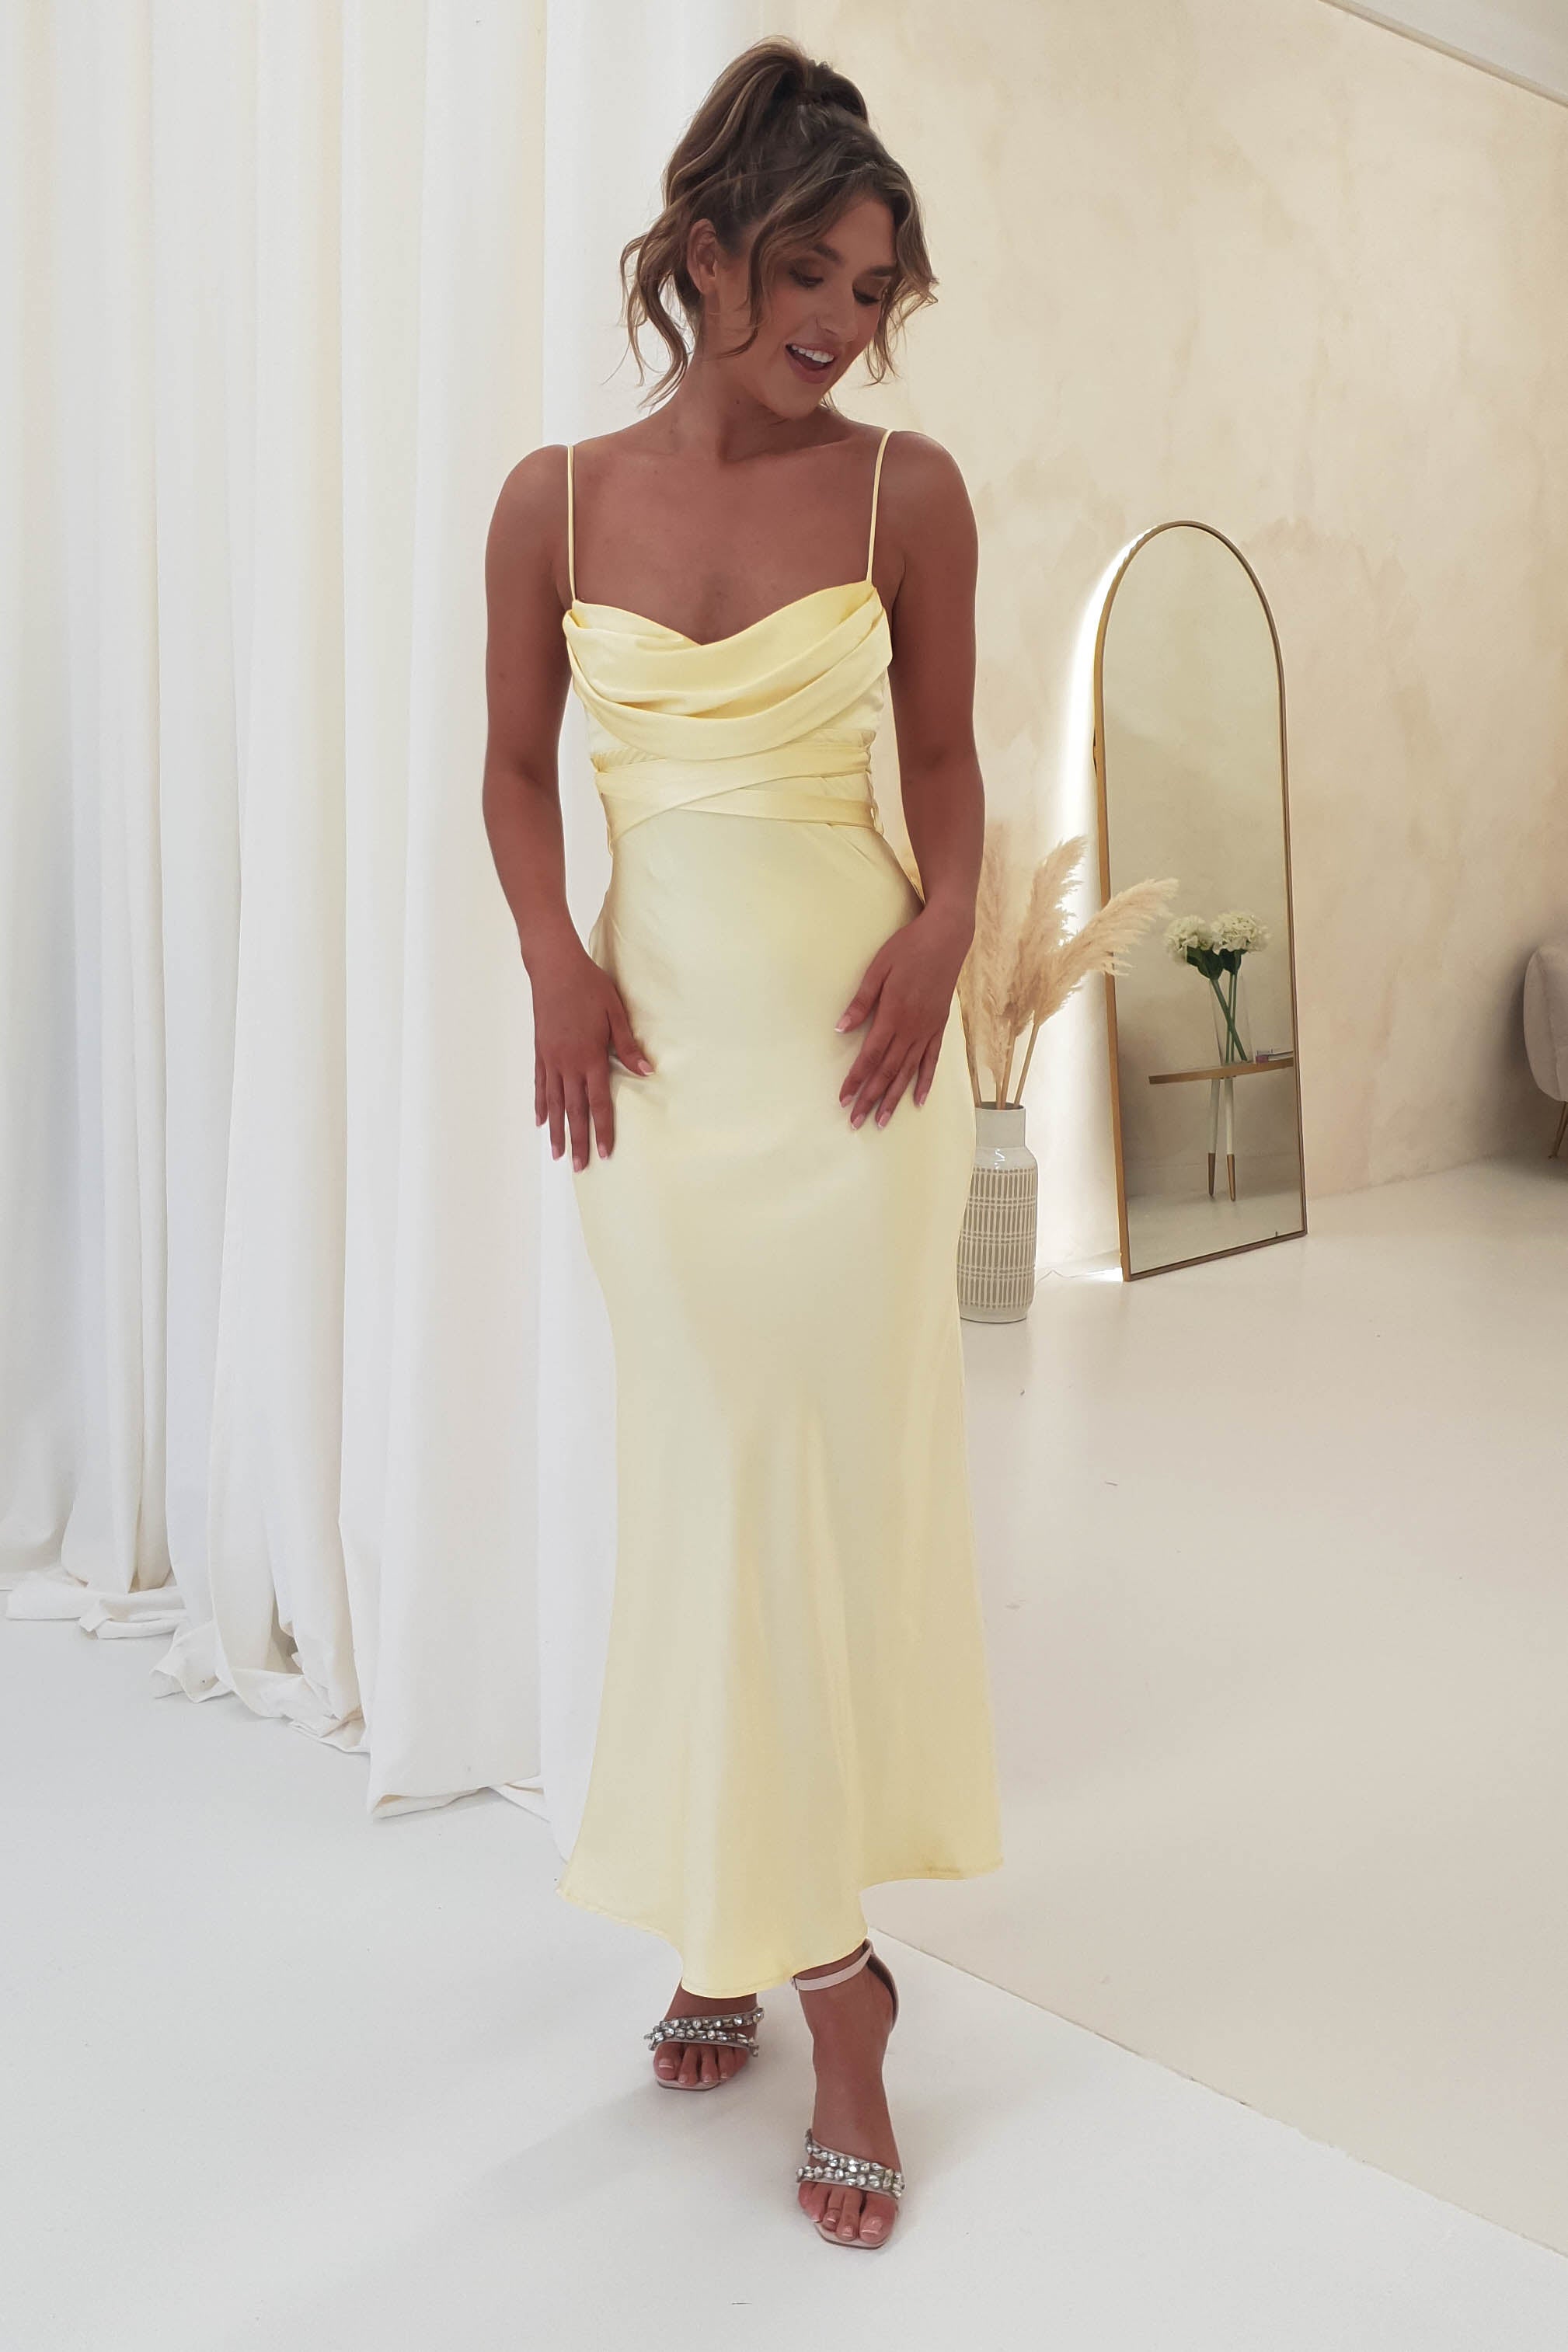 done-st5013d-yellow-midi-with-cowl-neck-and-front-tie-straps-butter-yellow-sasha-rowan-bodycon-maxi-dress-baby-pink-dresses-51131220918613.jpg